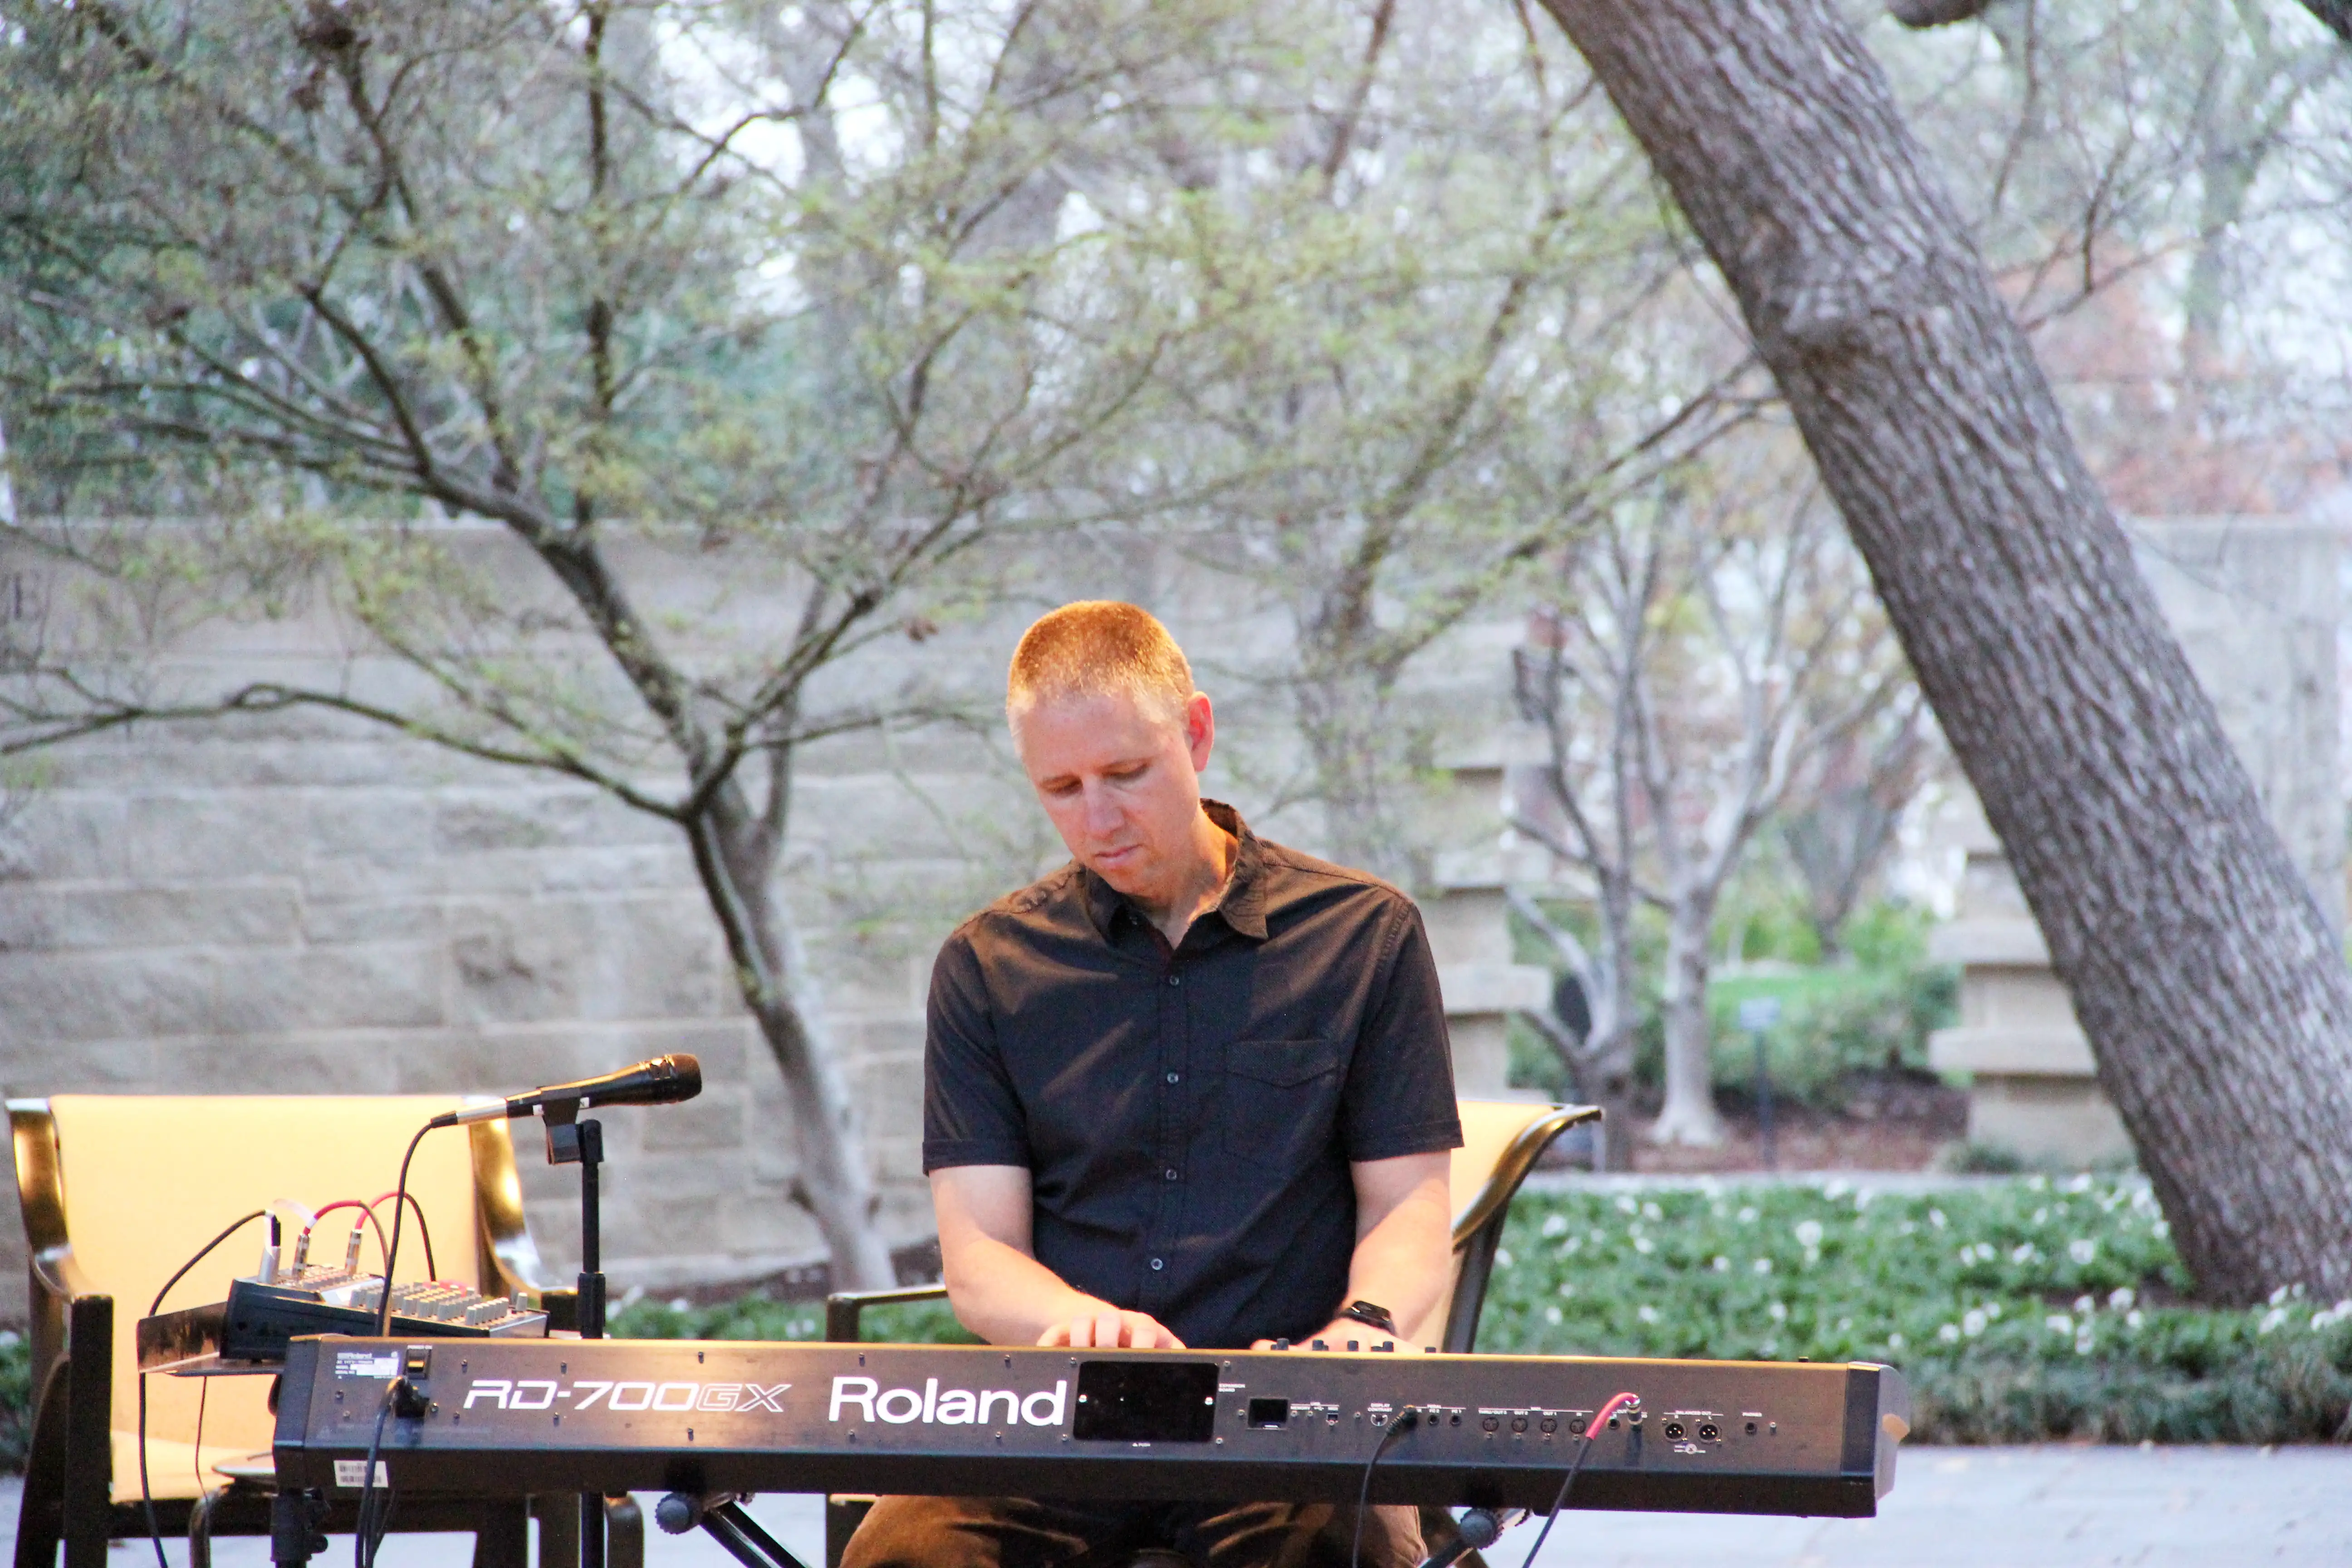 Lee playing piano at the Dallas Arboretum